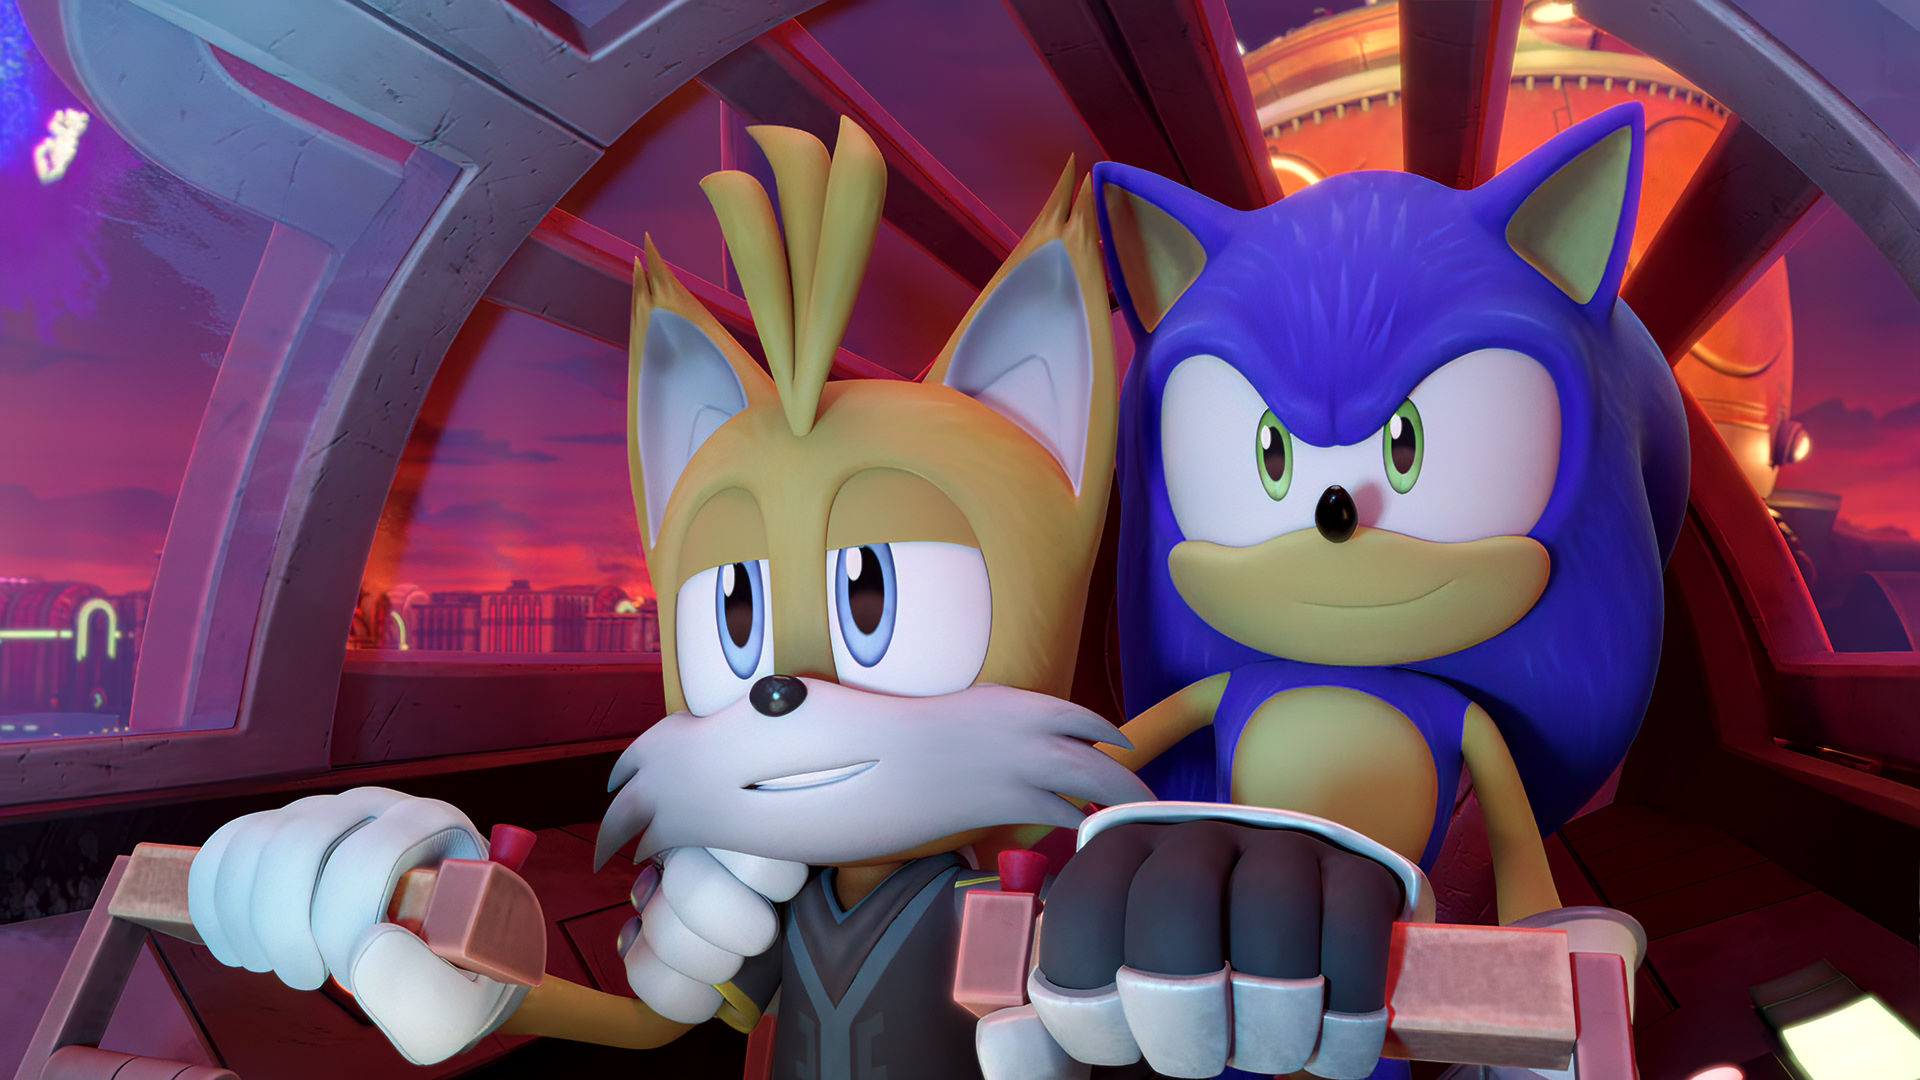 Sonic Prime - Tails Nine #02 by SonicBoomGirl23 on DeviantArt